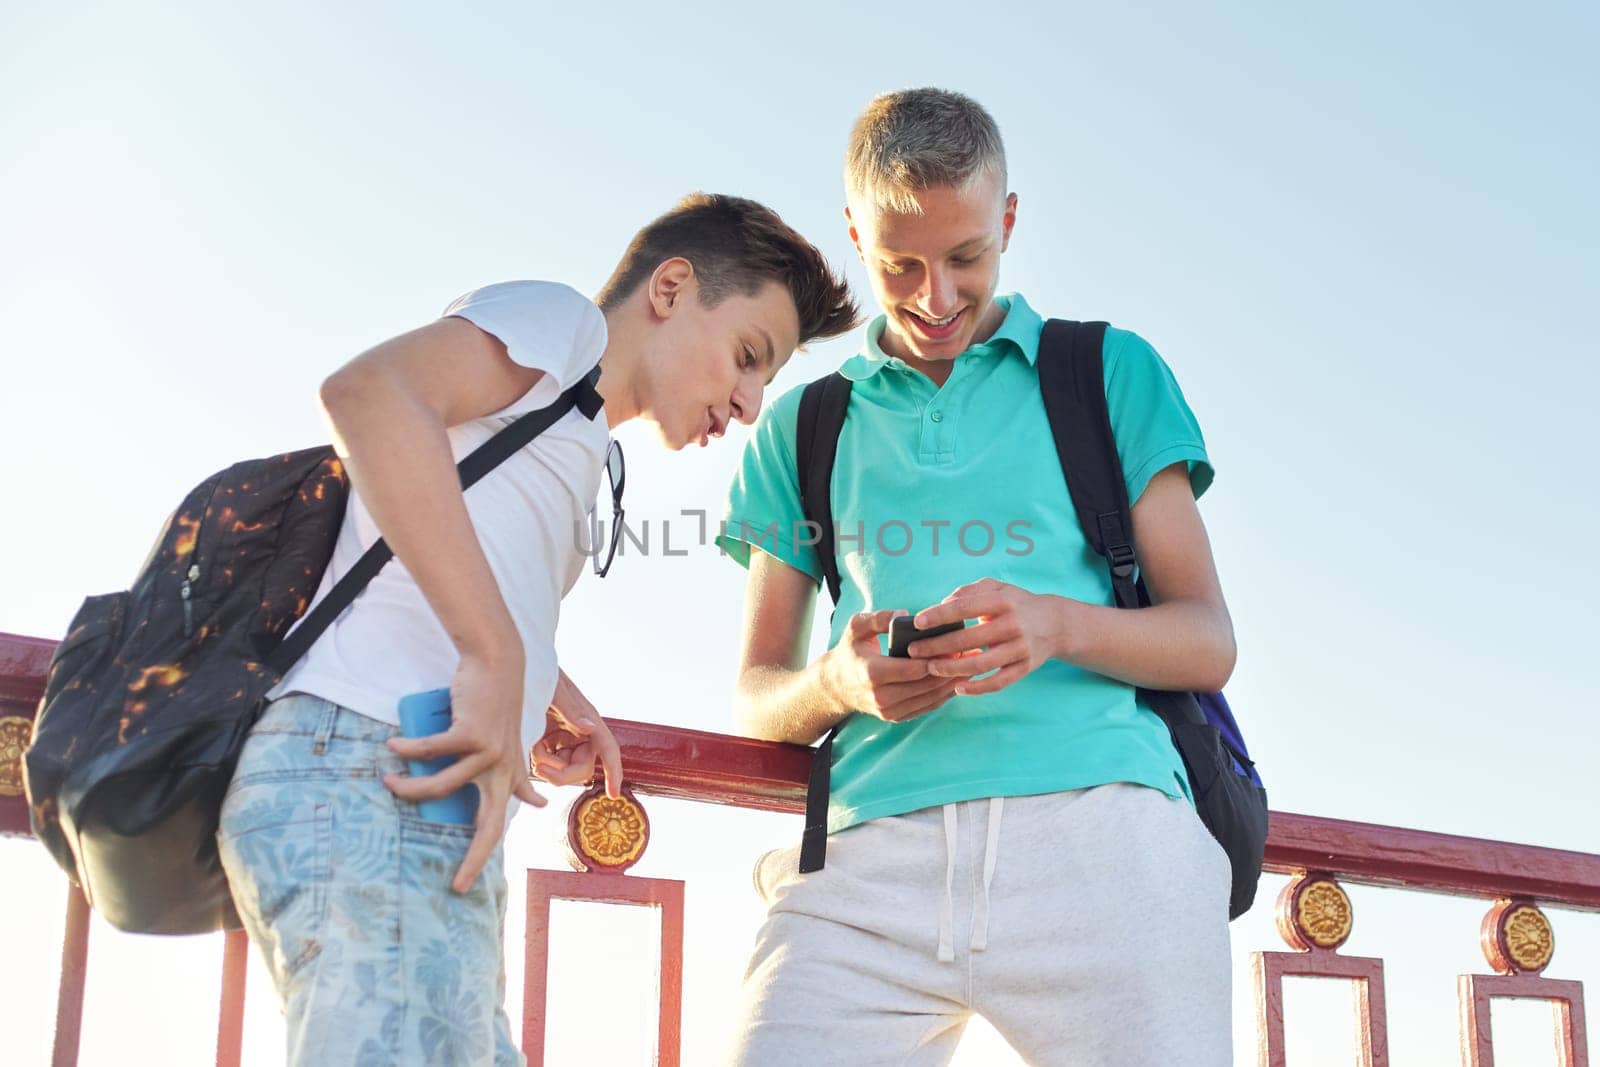 Outdoor portrait of two talking boys teenagers 15, 16 years old, males laughing look at smartphone, golden hour